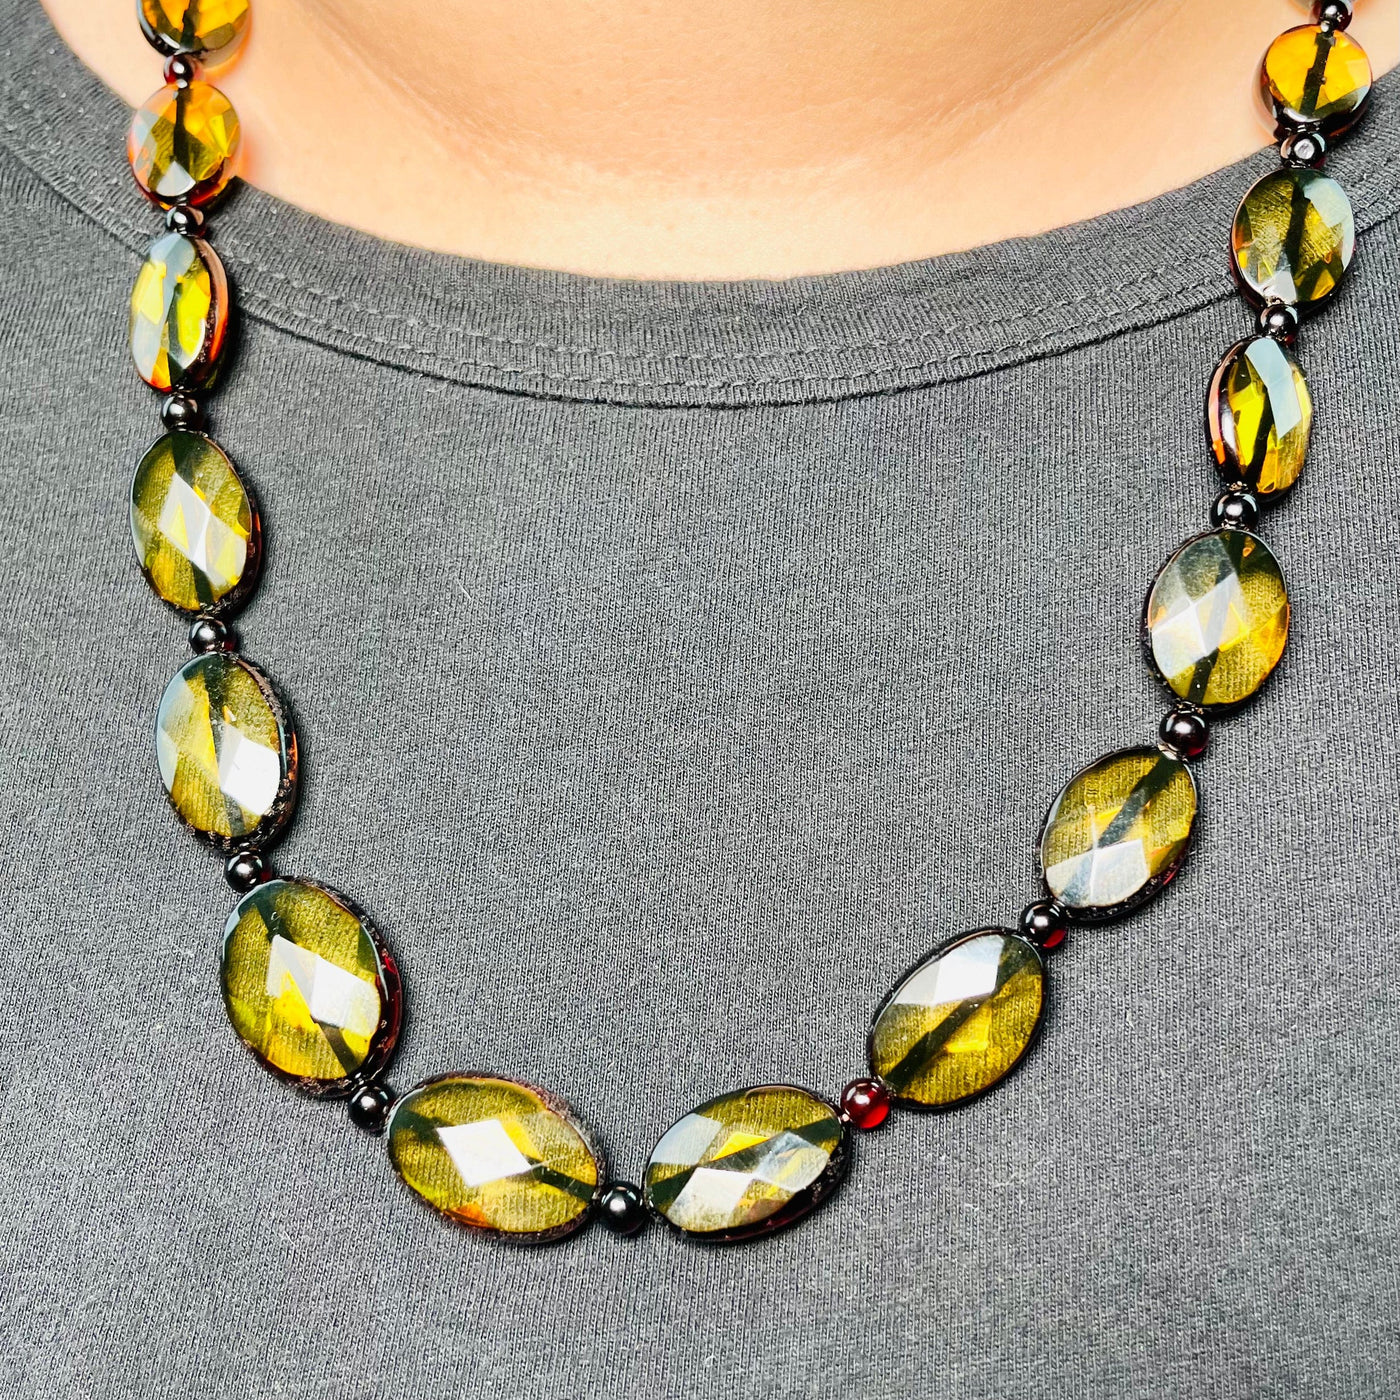 Baltic Amber Beaded Necklace pictured worn by a woman.